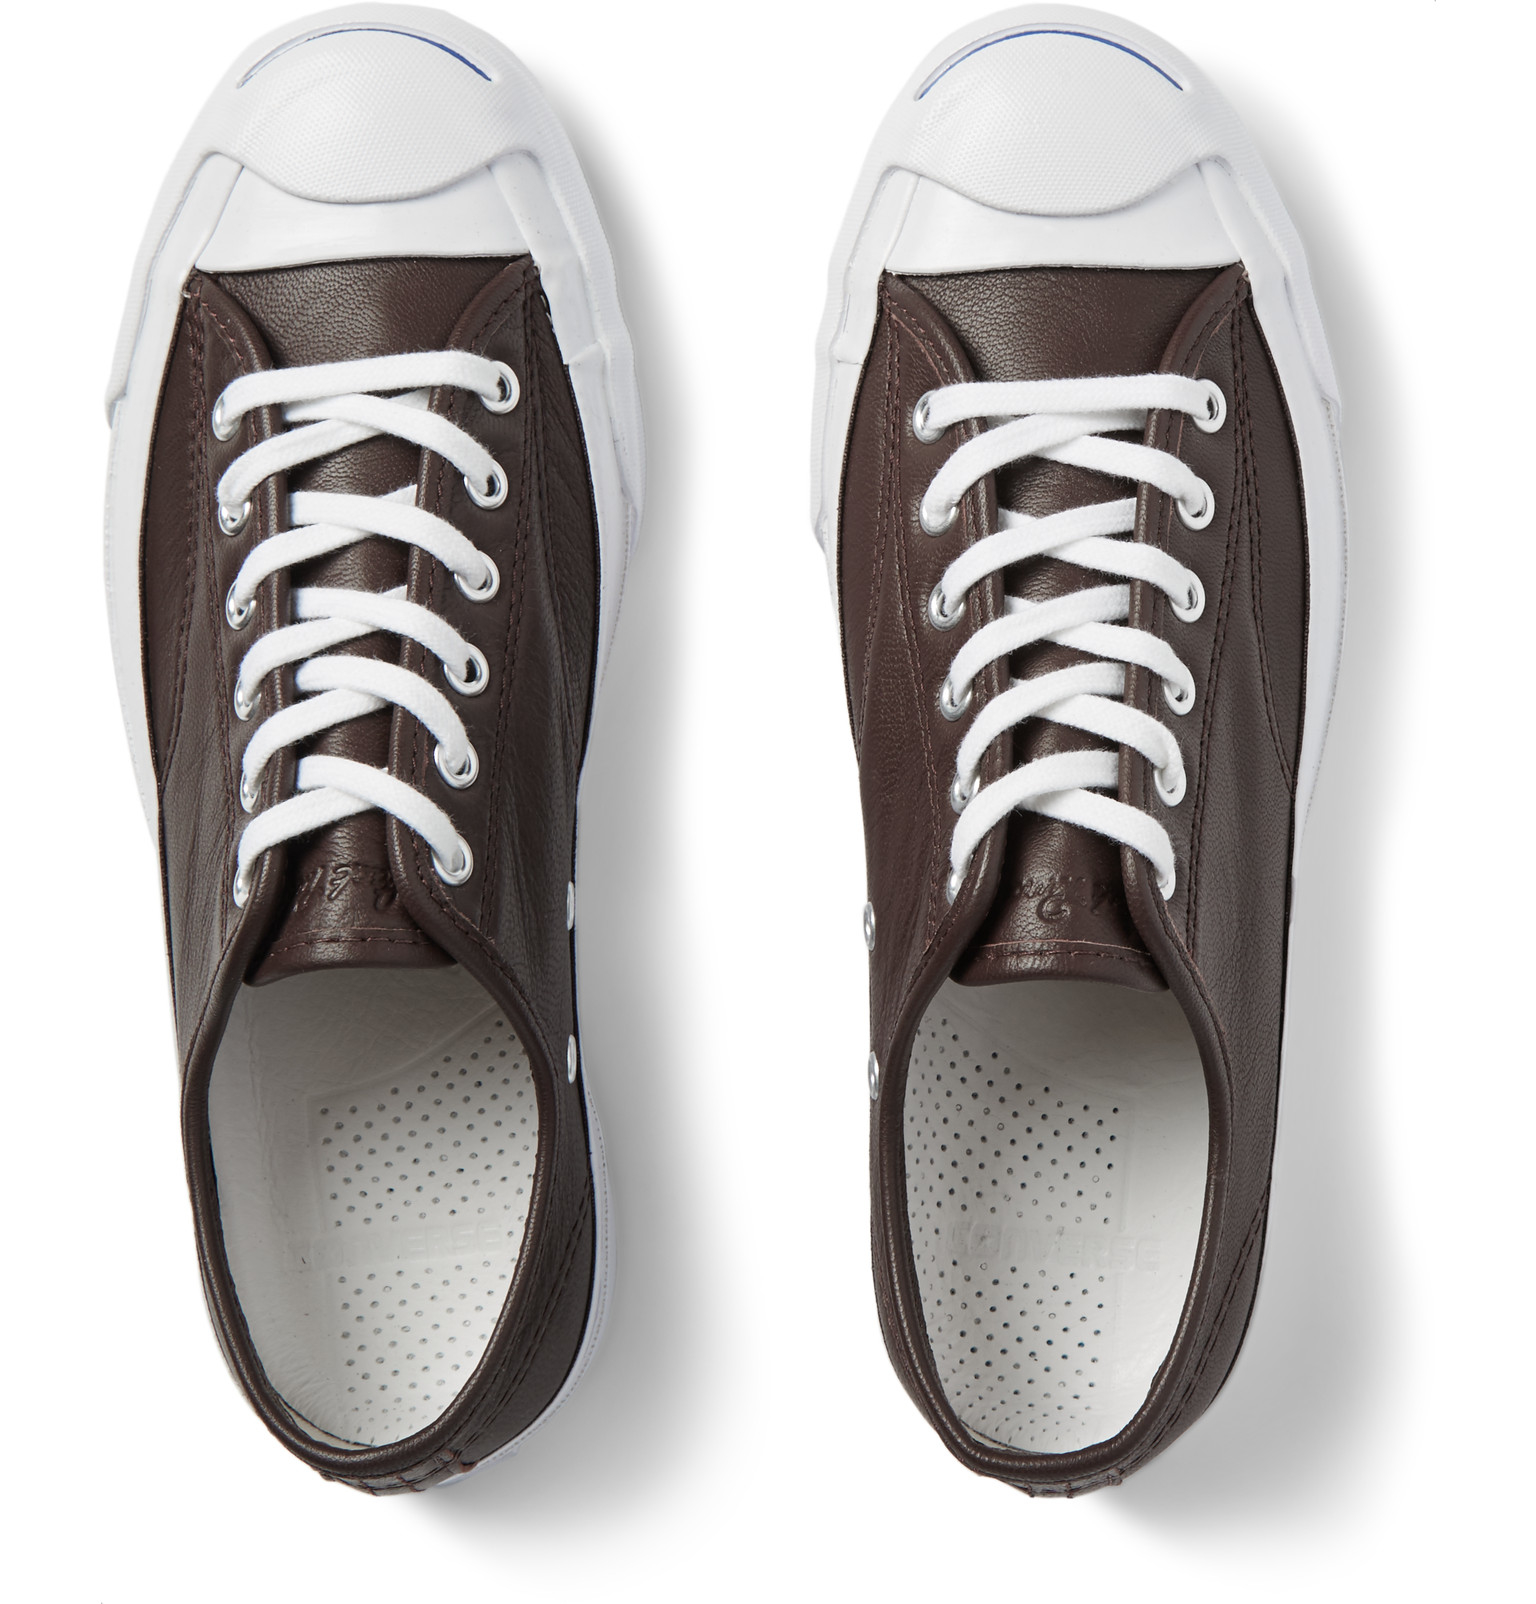 Converse Jack Purcell Signature Leather Sneakers in Dark Brown (Brown ...